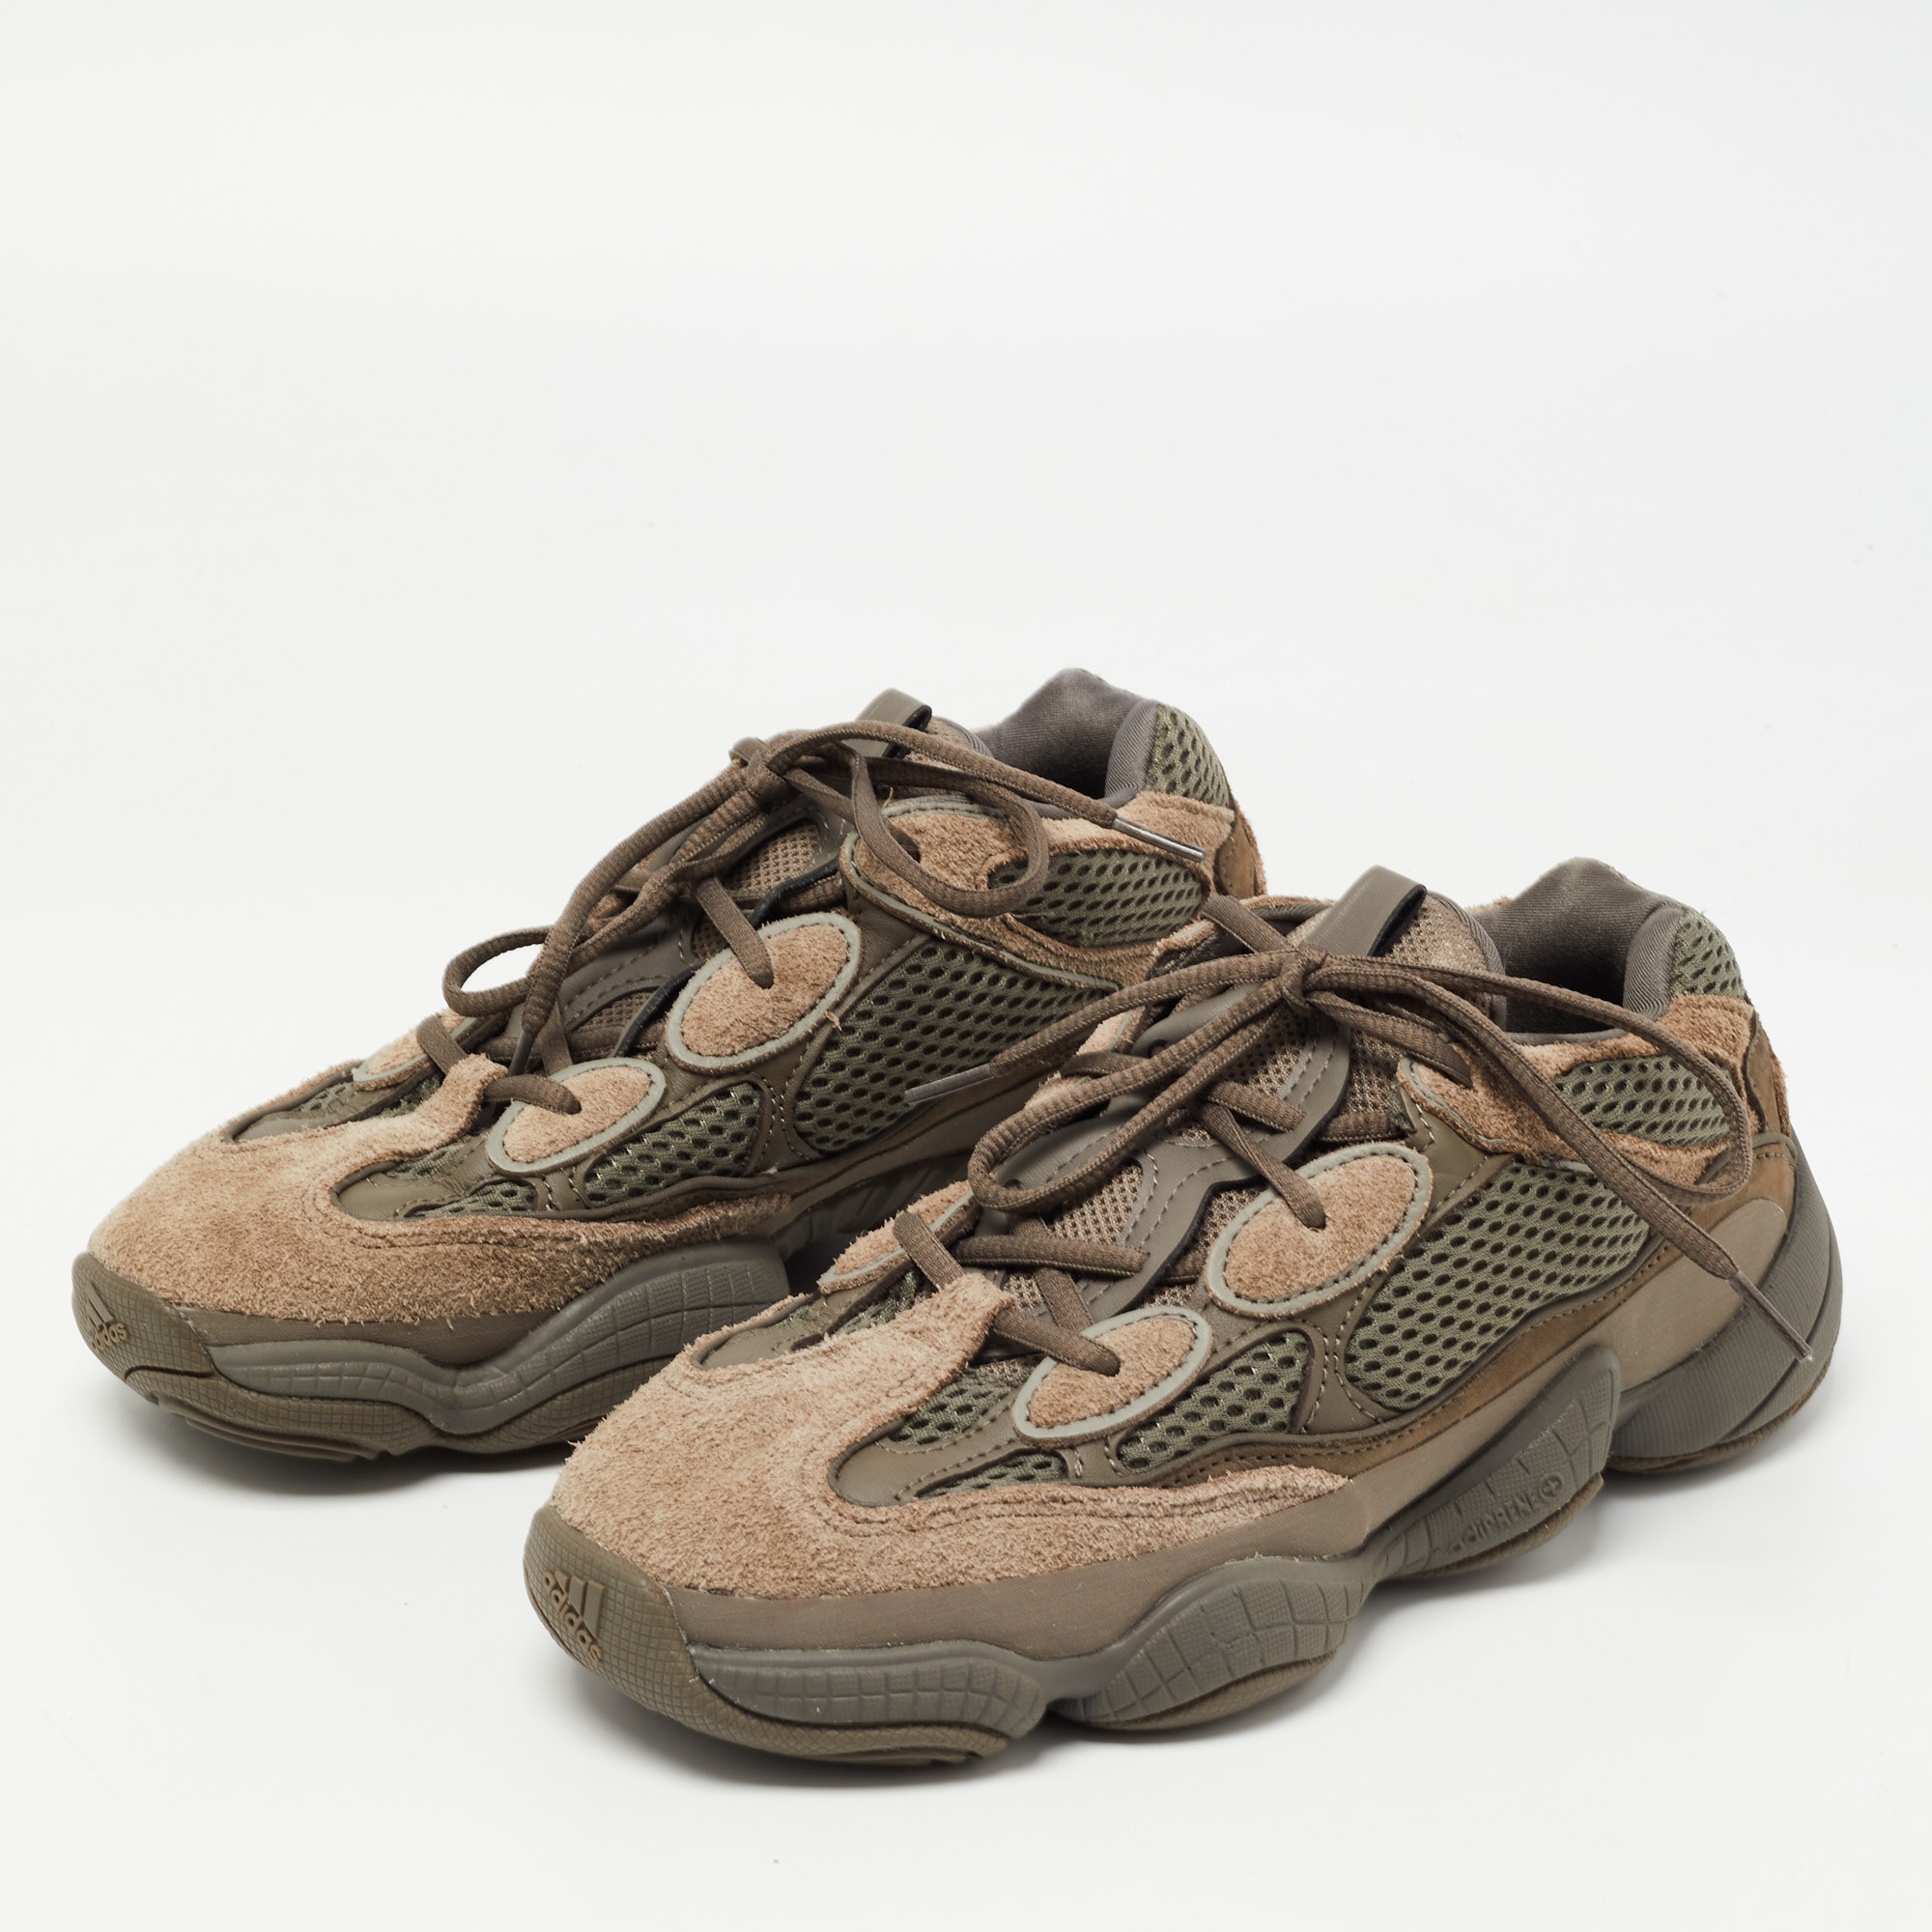 

Yeezy x Adidas Brown/Grey Leather and Suede Yeezy 500 Clay Sneakers Size 39 1/3